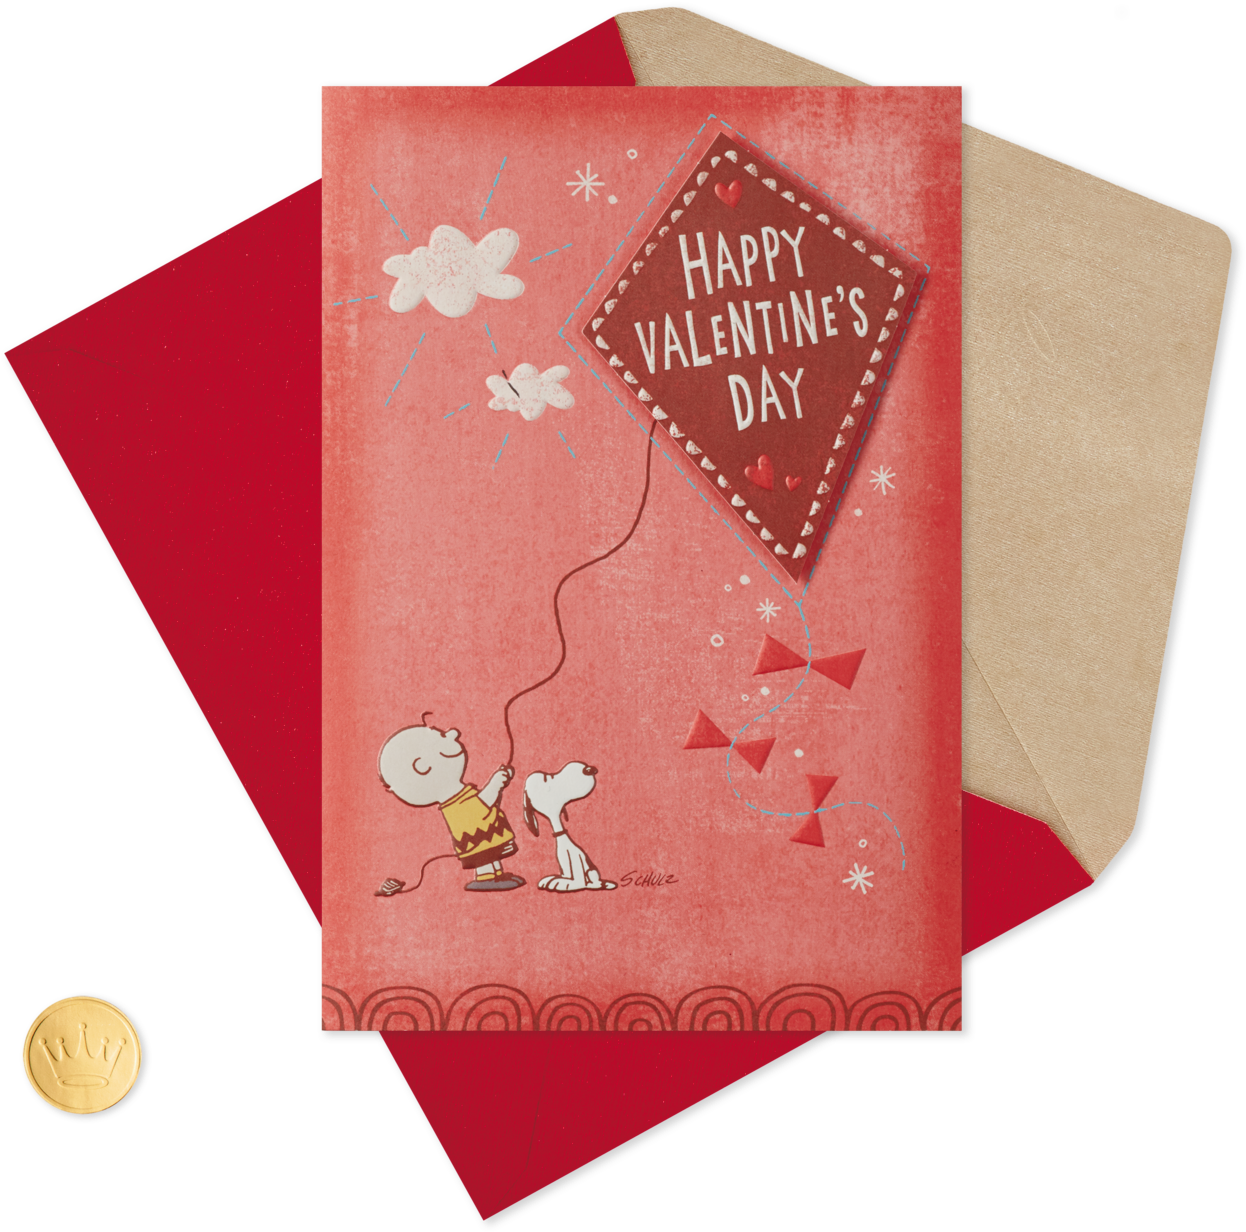 Peanuts® Charlie Brown And Snoopy Valentine's Day Card - Happy Valentine's Day Pic Son (1470x1470), Png Download